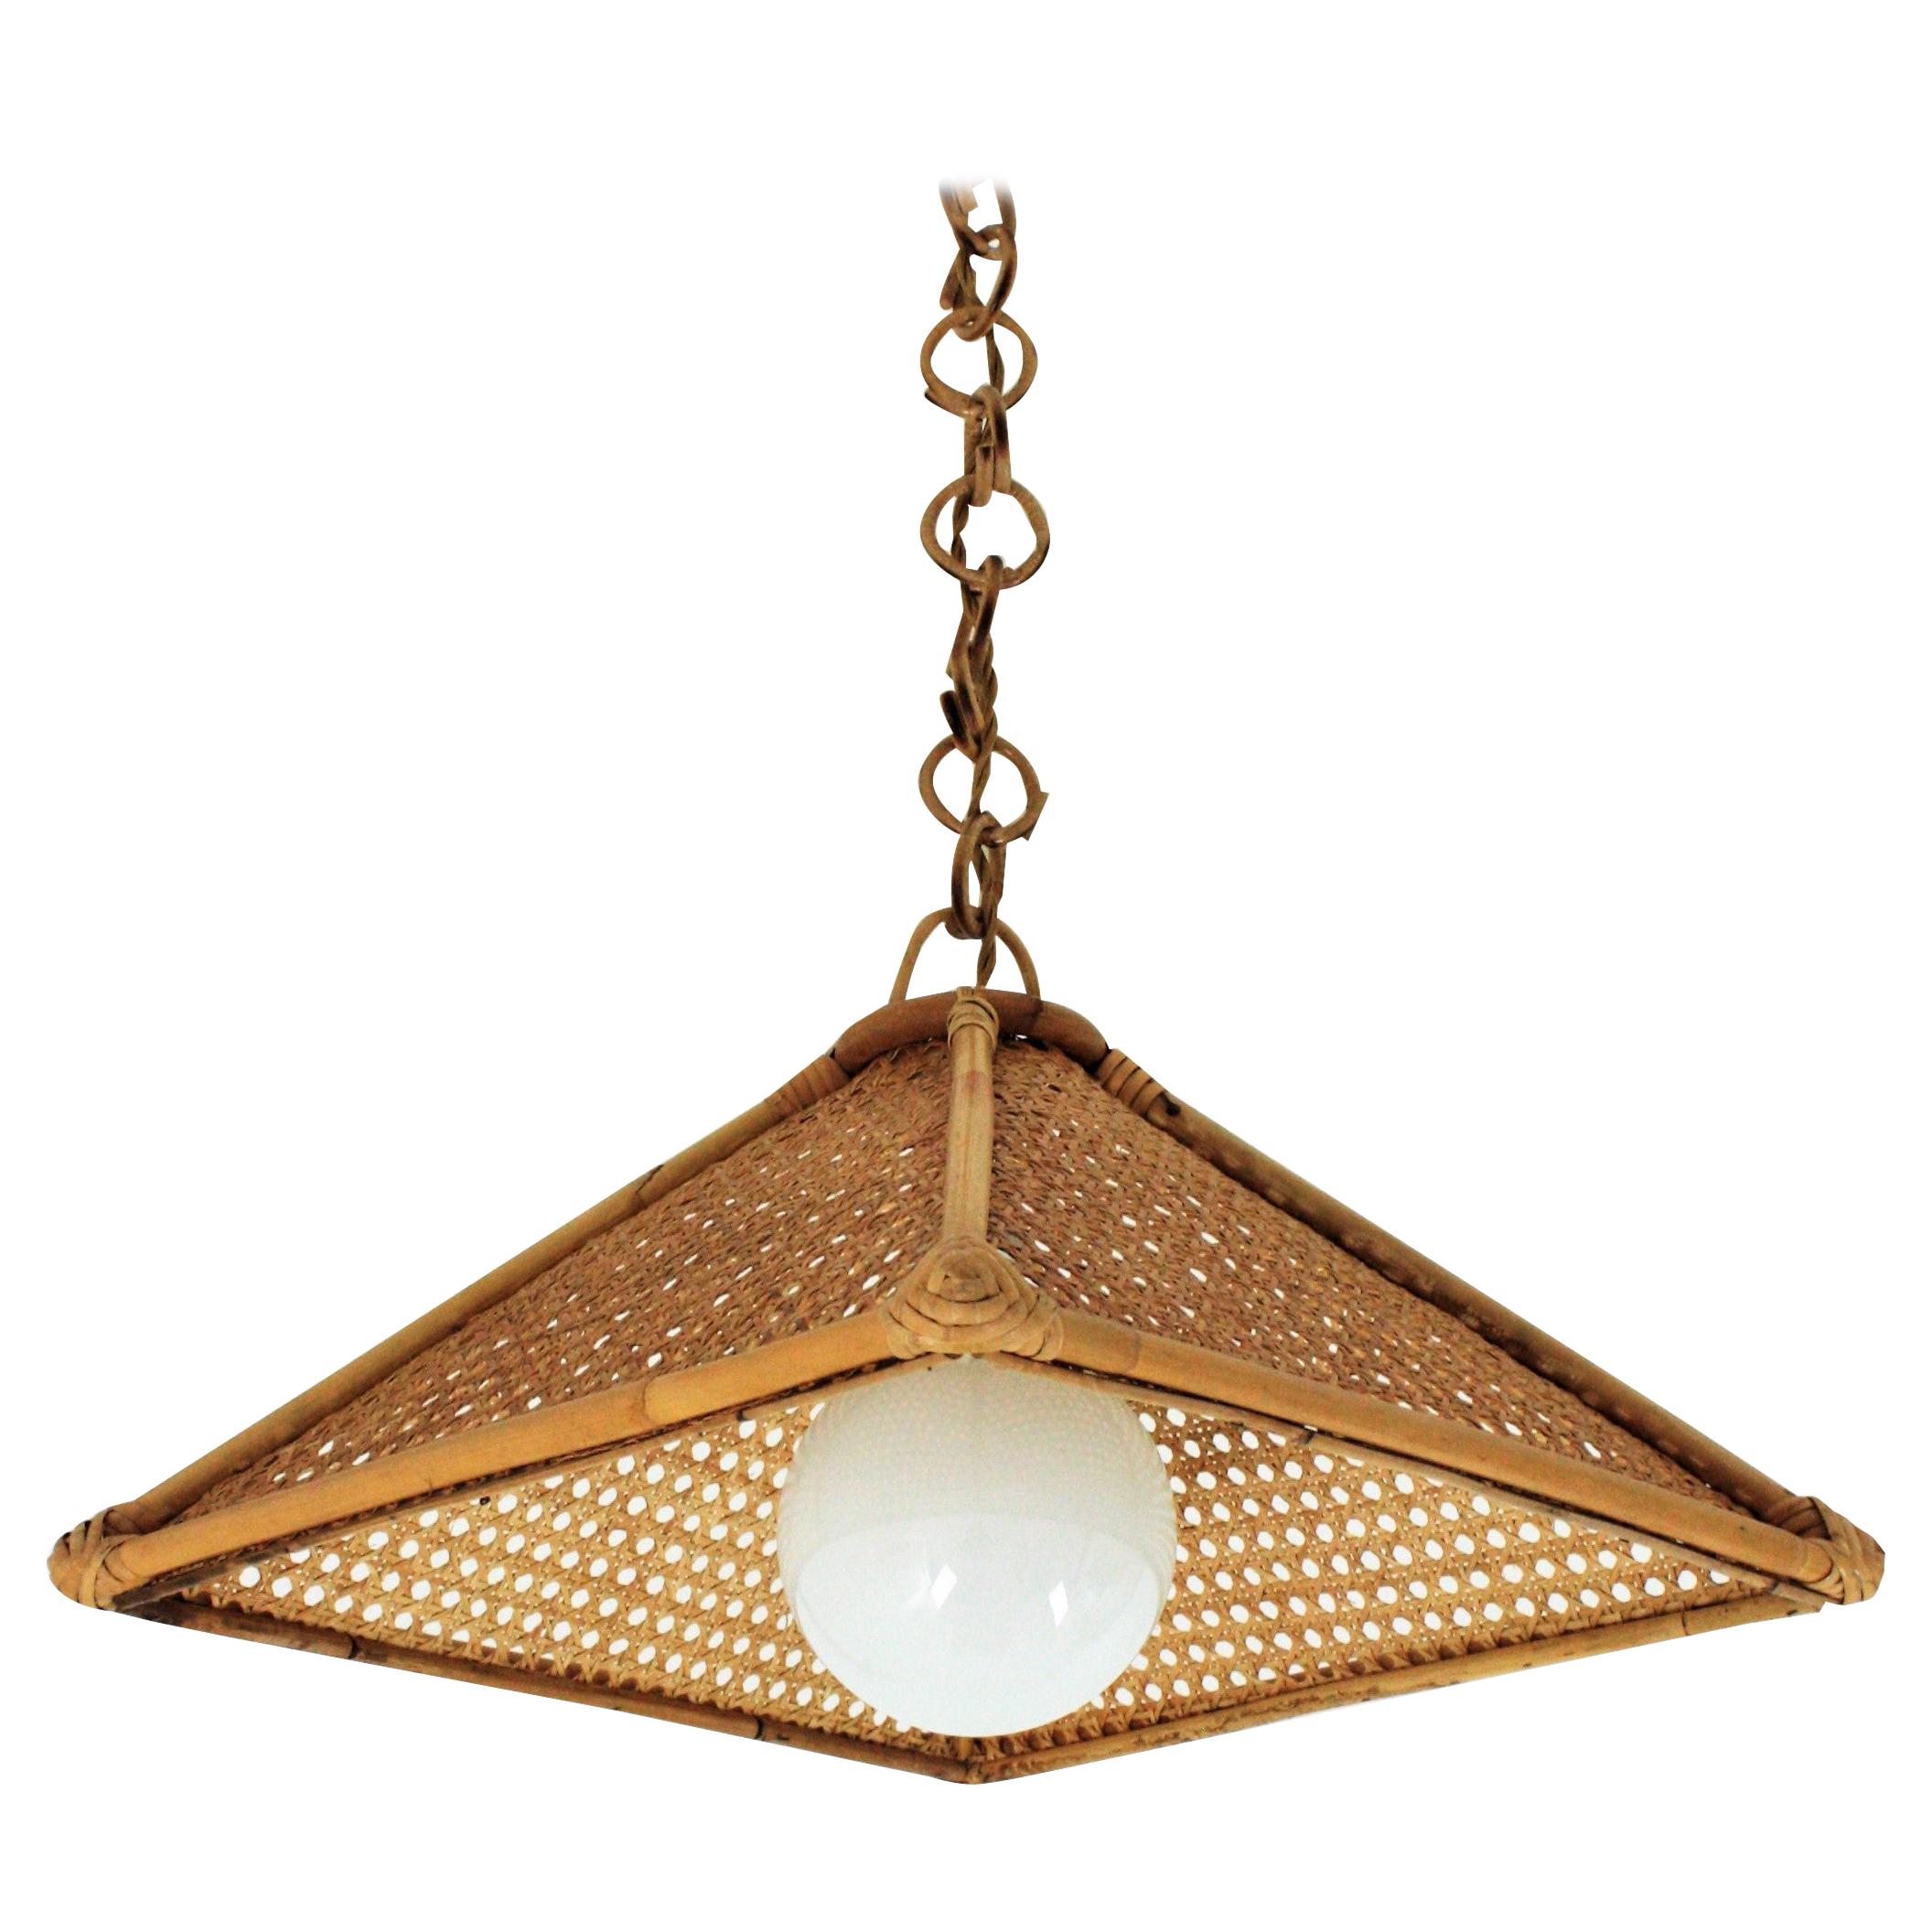 Spanish Modern Rattan and Wicker Wire Trapezoid Pendant Hanging Light, 1960s For Sale